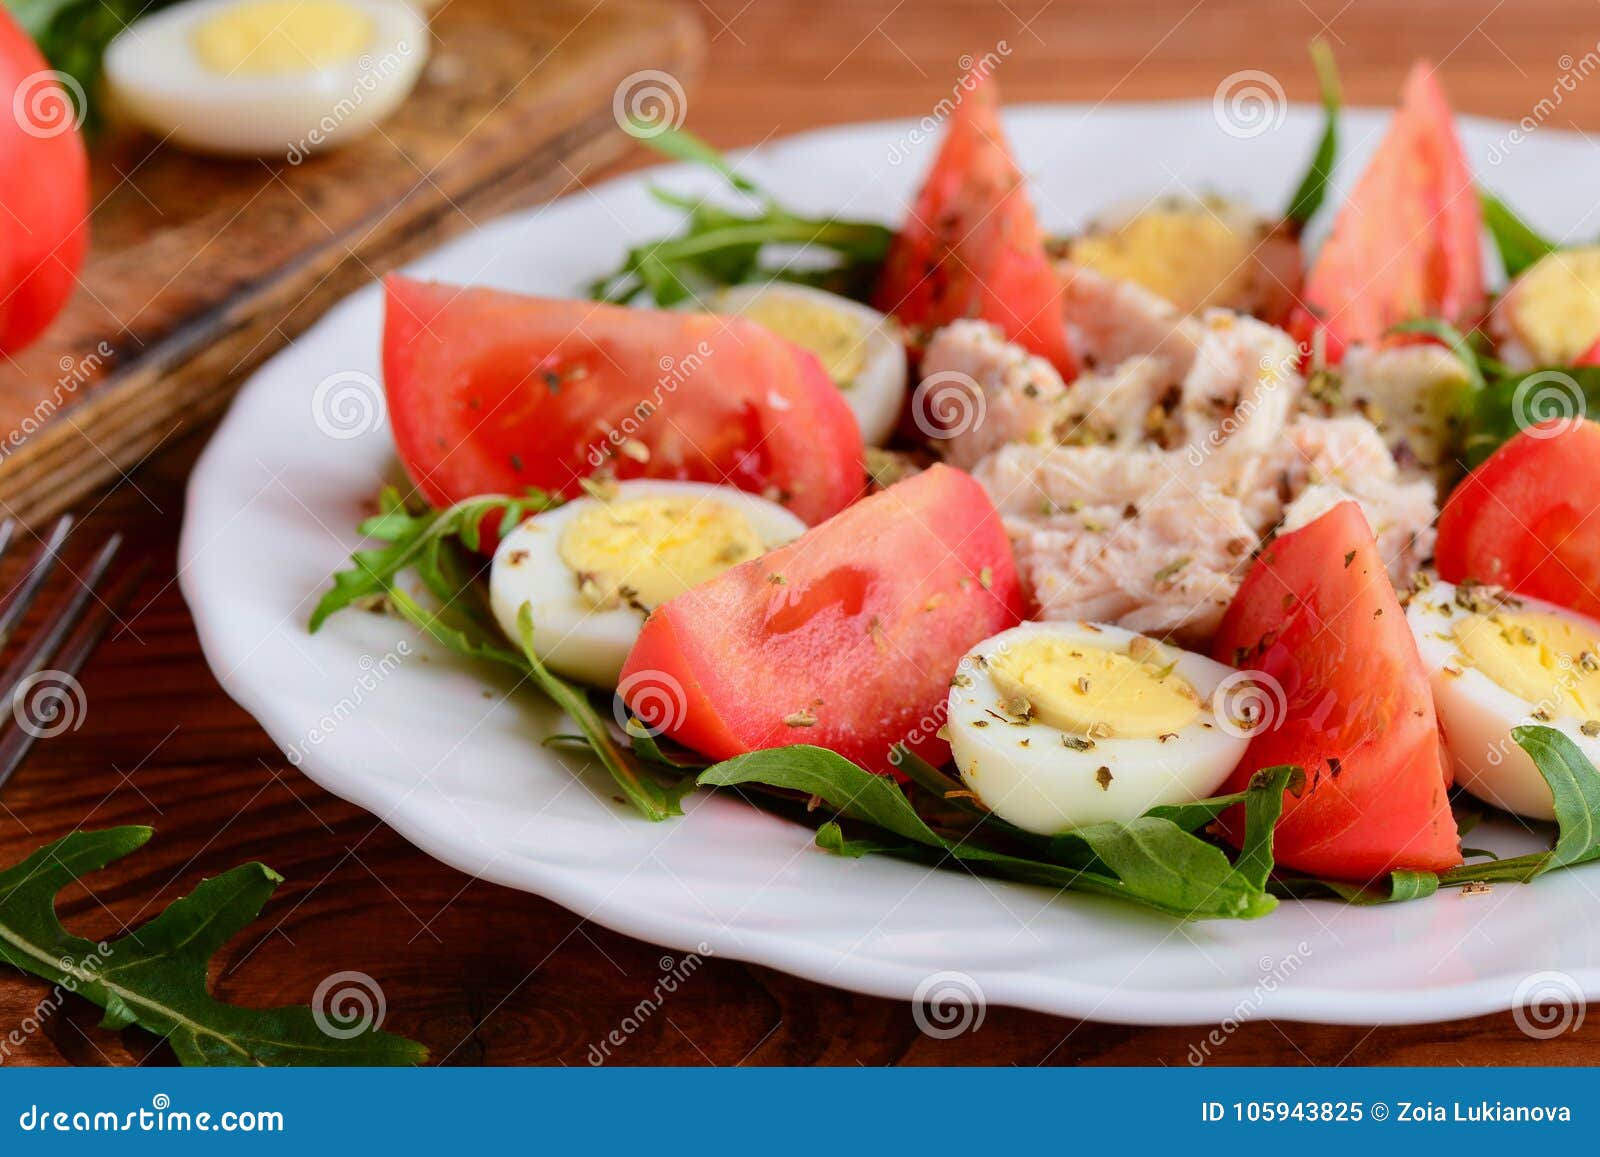 Chicken Breast Tomatoes Quail Eggs And Arugula Salad Healthy And Tasty Salad For Lunch Or Dinner Stock Image Image Of Dressing Cherry 105943825